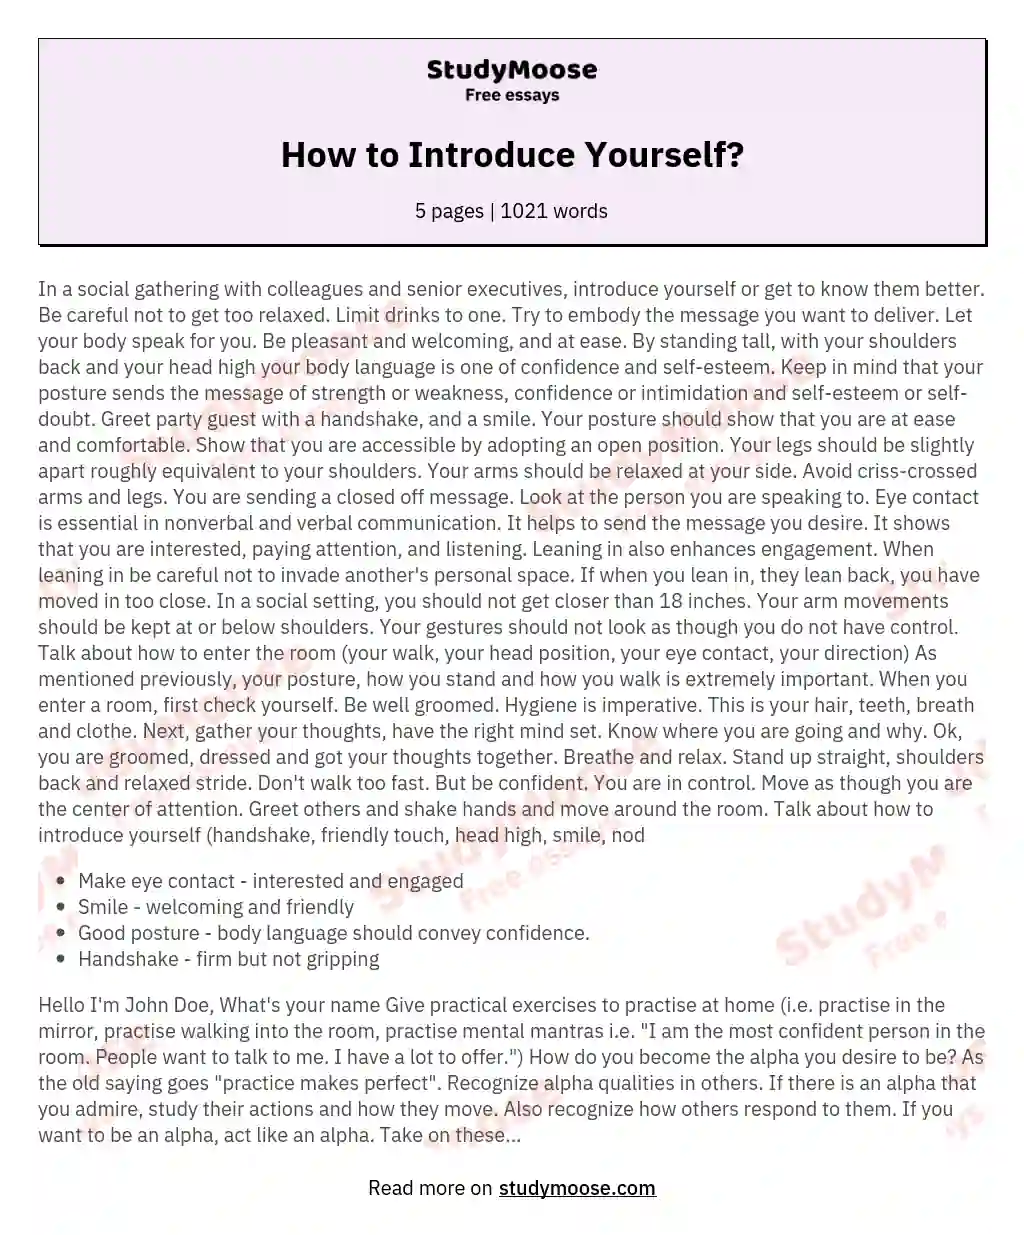 How to Introduce Yourself?